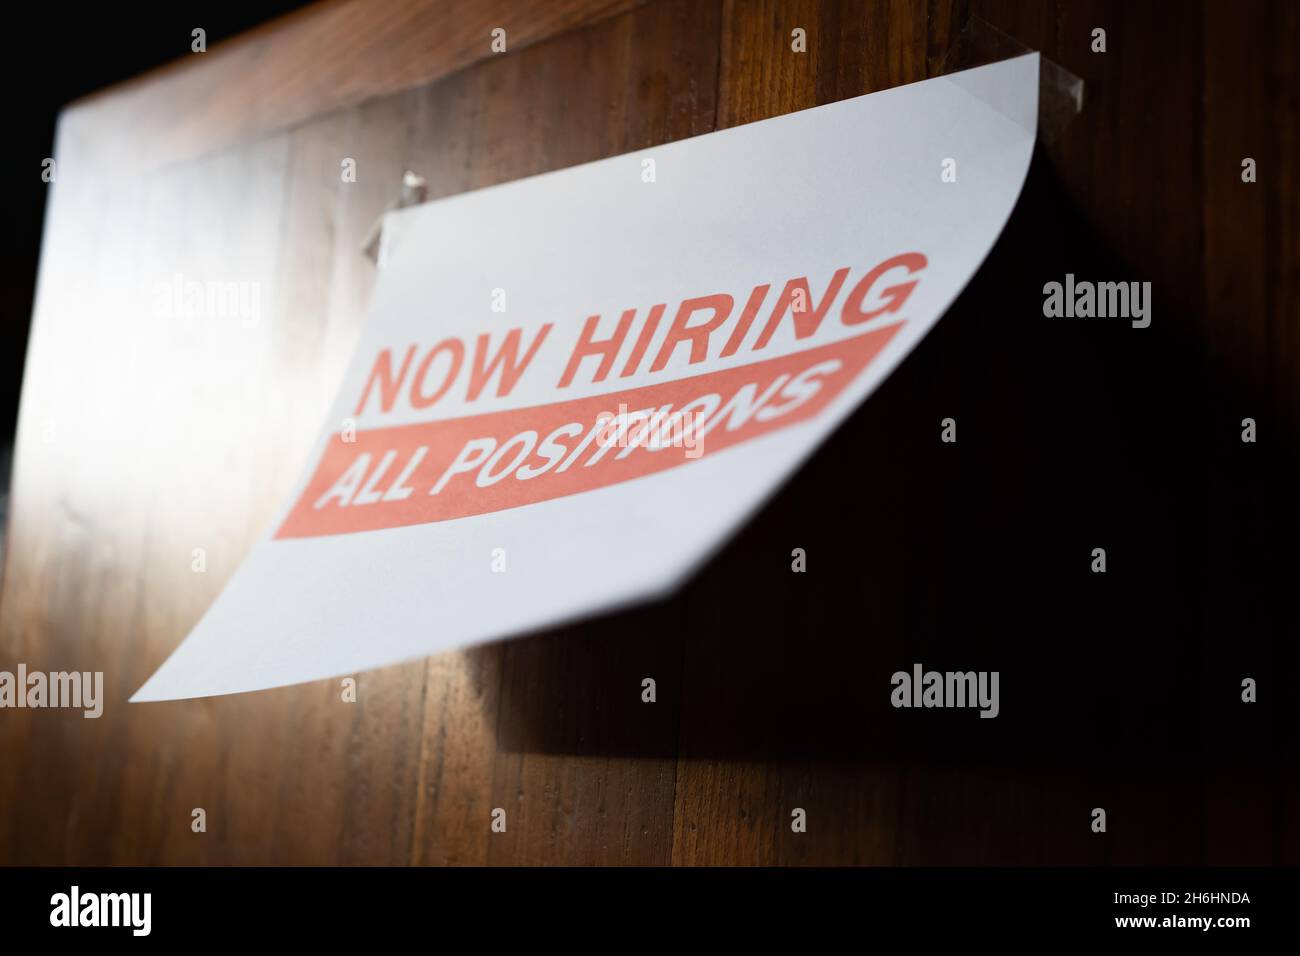 Now hiring sign on the wall Stock Photo